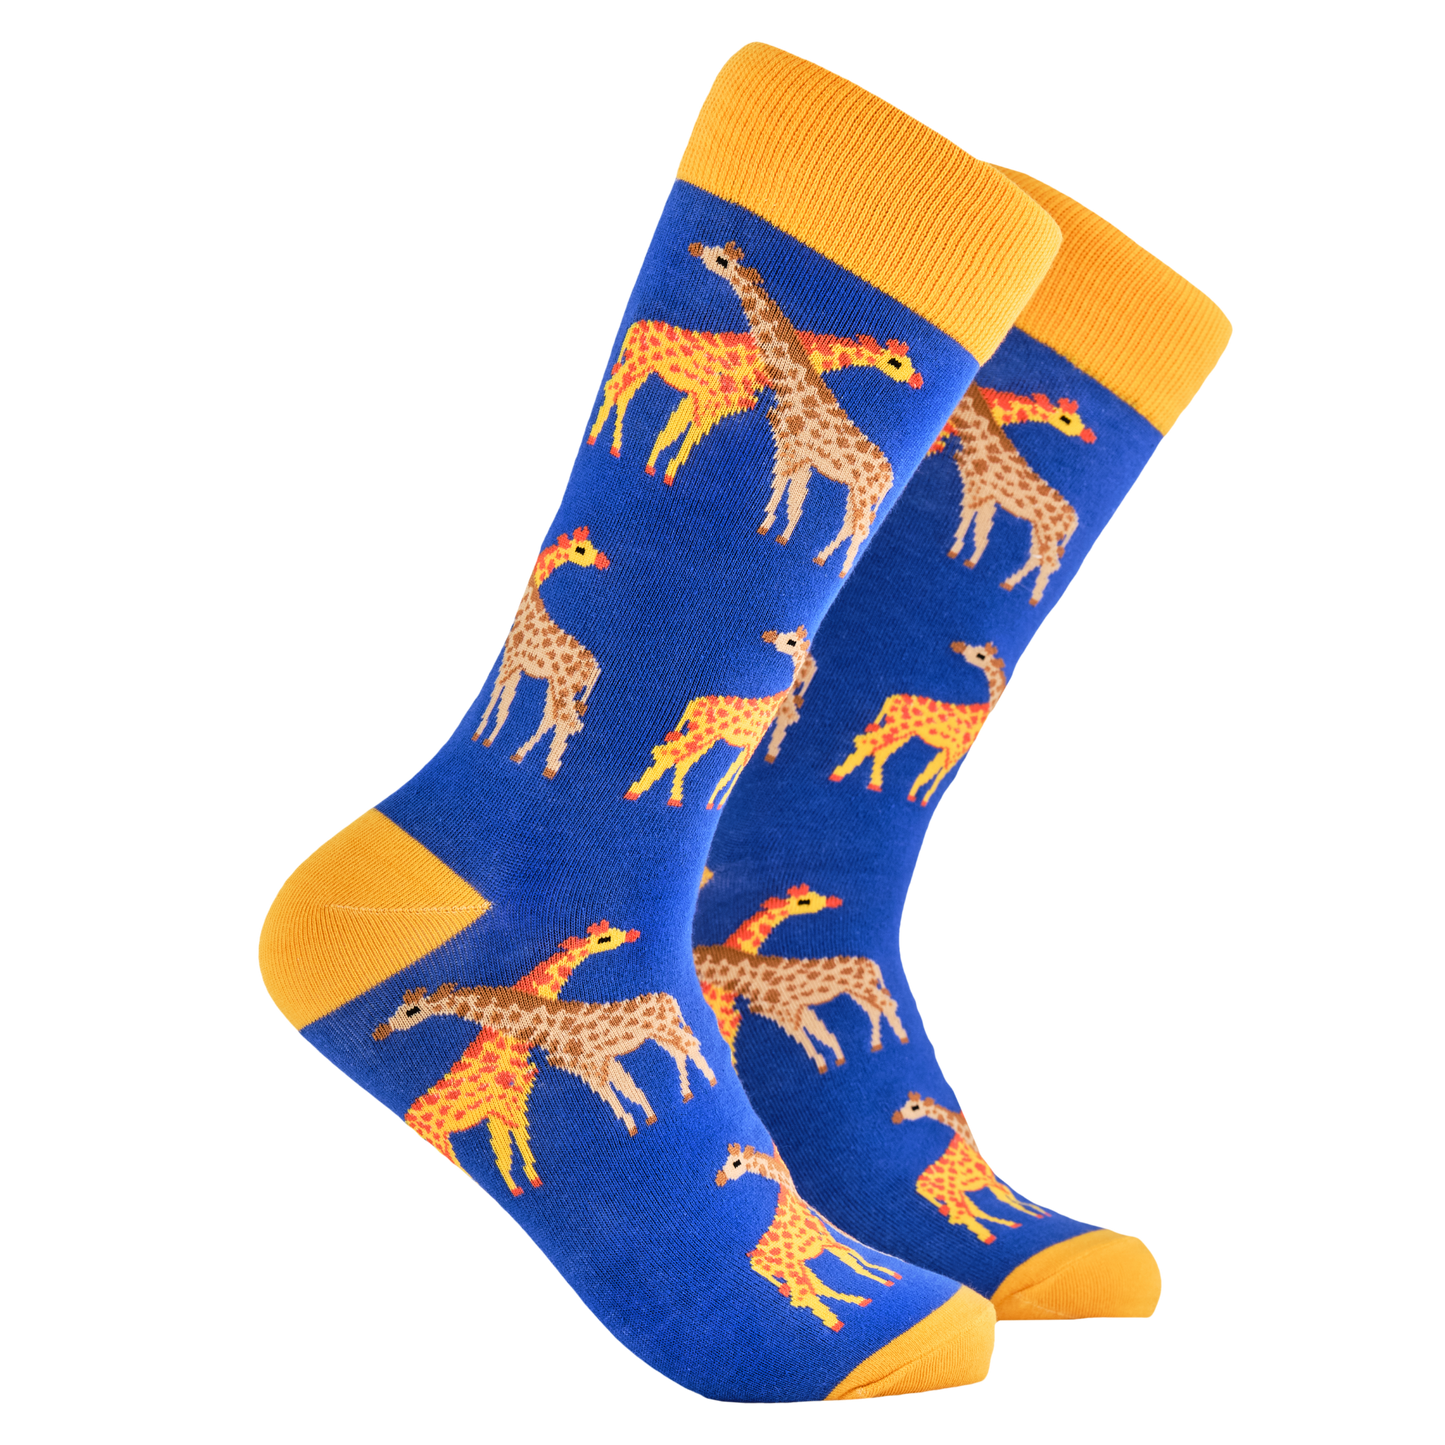 Giraffe Socks - What's the weather like up there? A pair of socks depicting giraffes. Royal blue legs, yellow cuff, heel and toe.